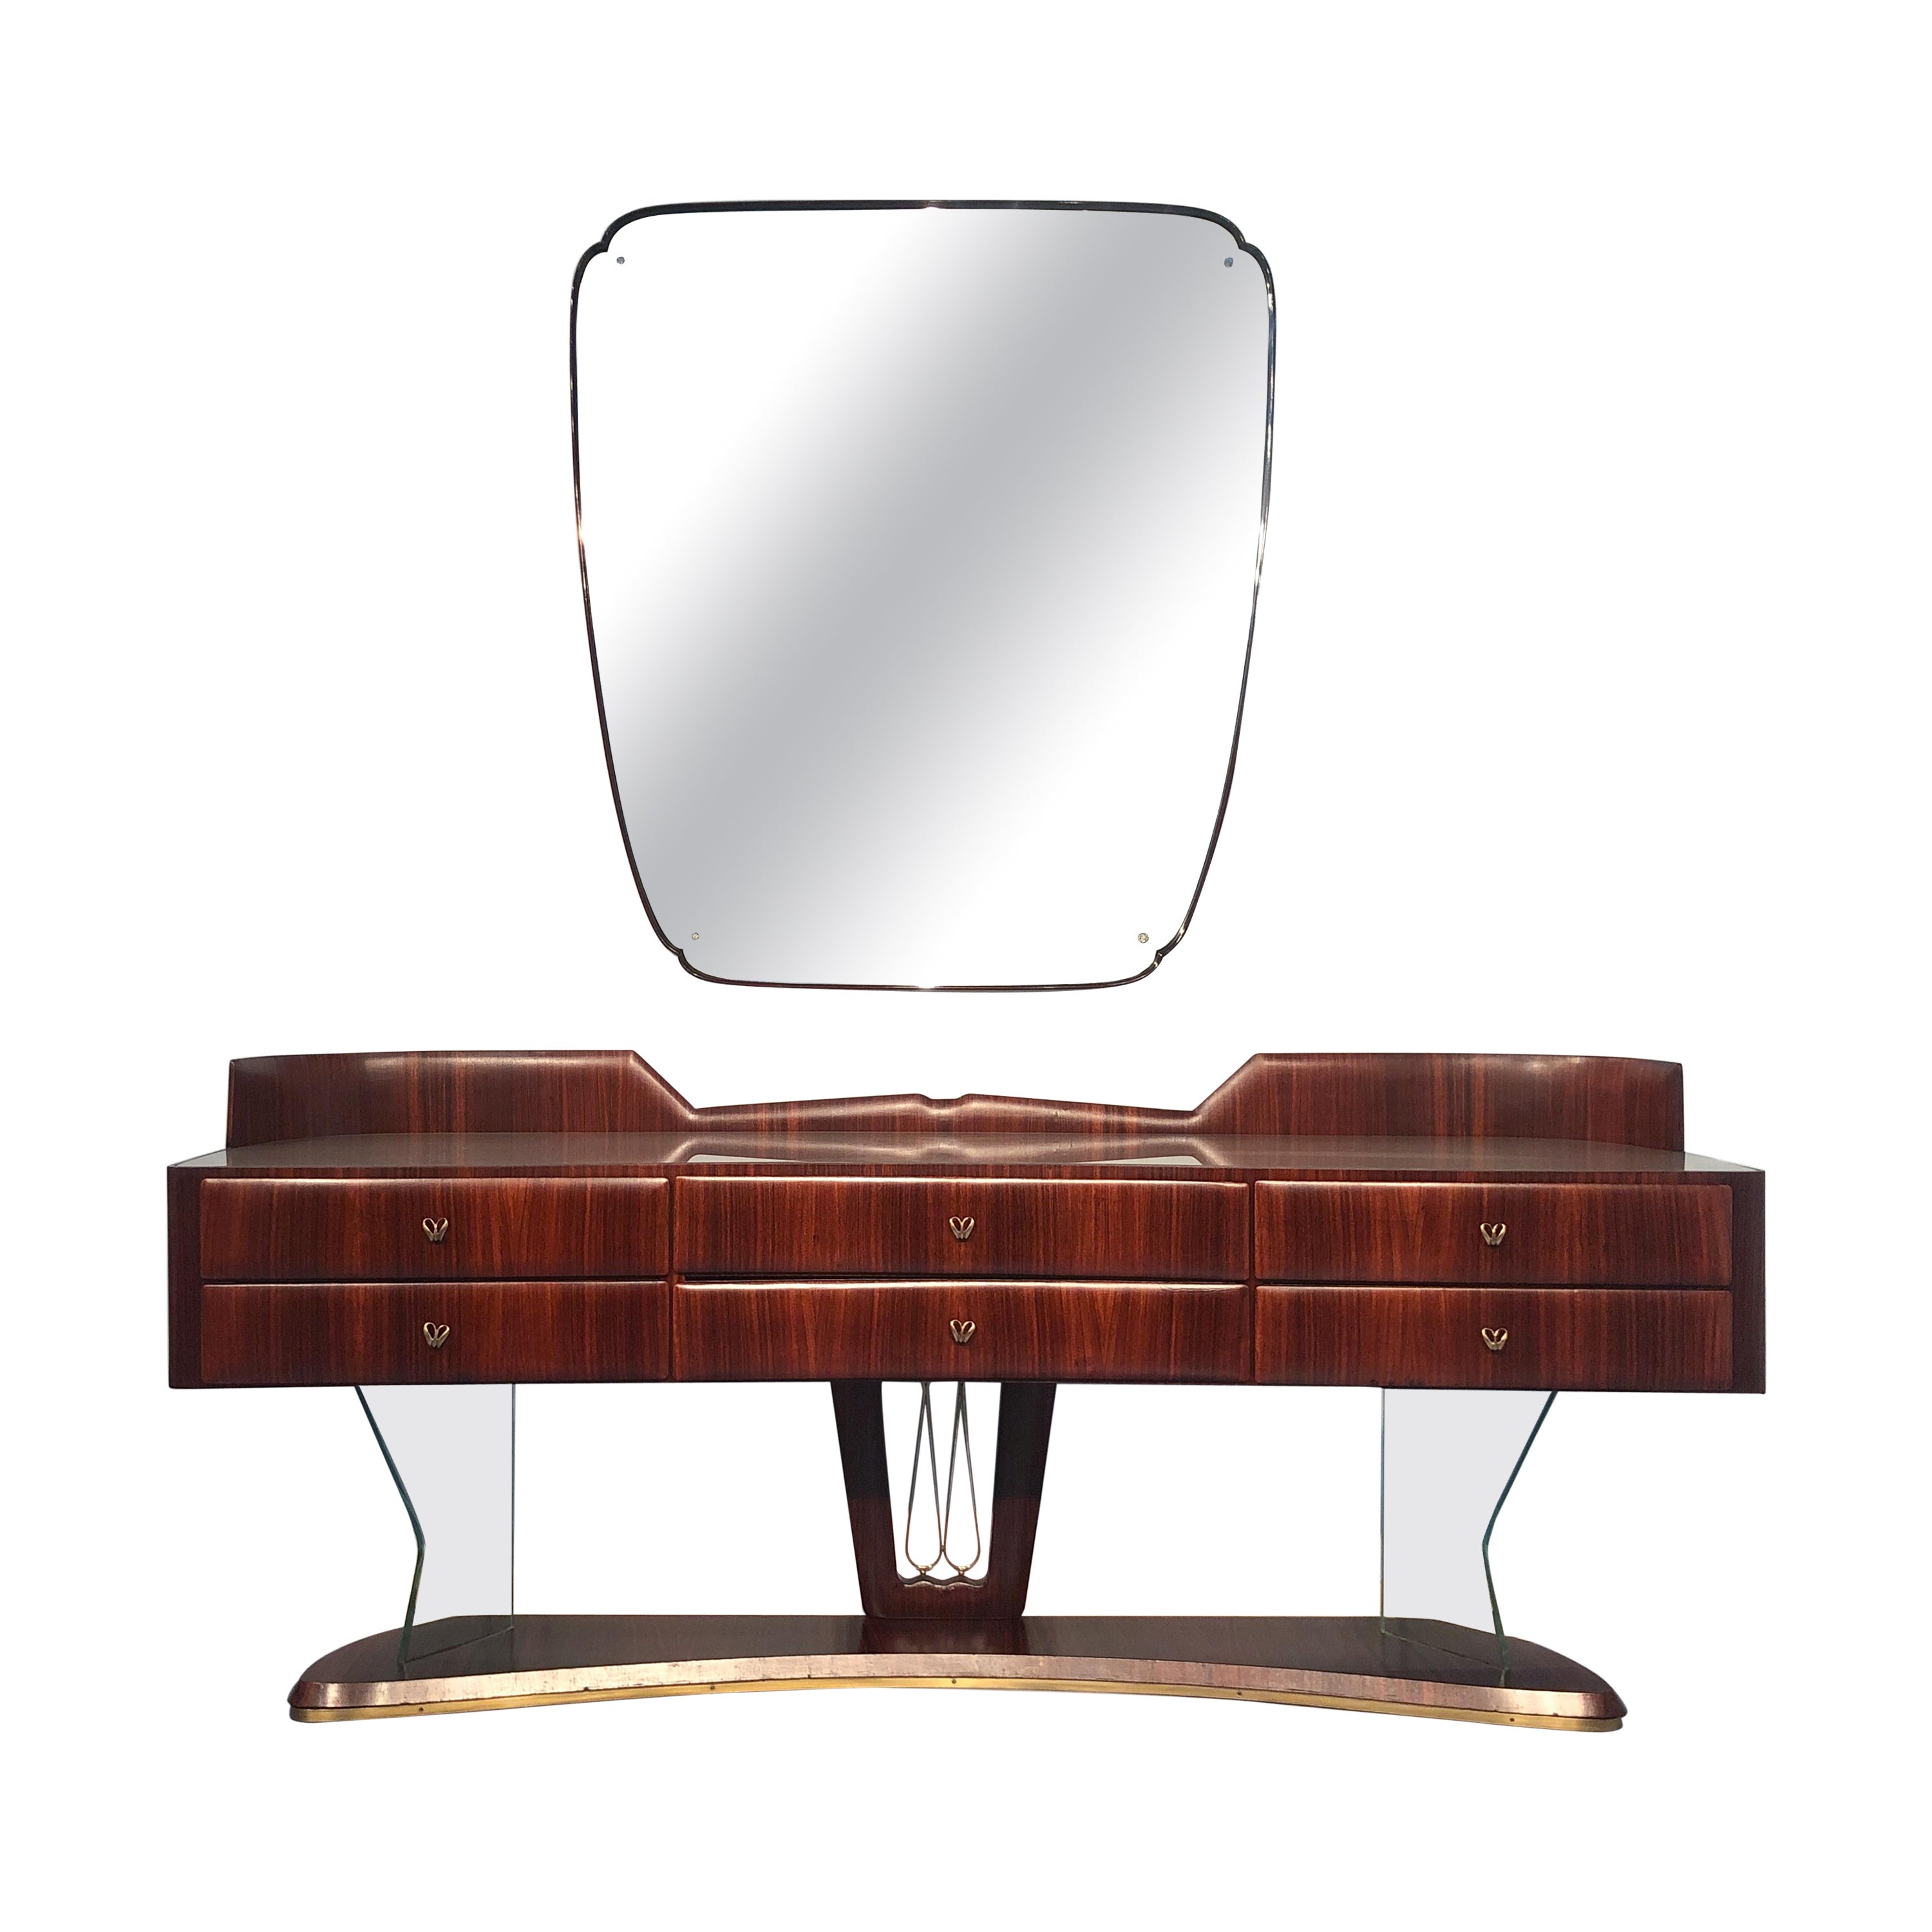 Italian Mid-Century Sideboard dresser with Mirror by Vittorio Dassi, 1950s For Sale